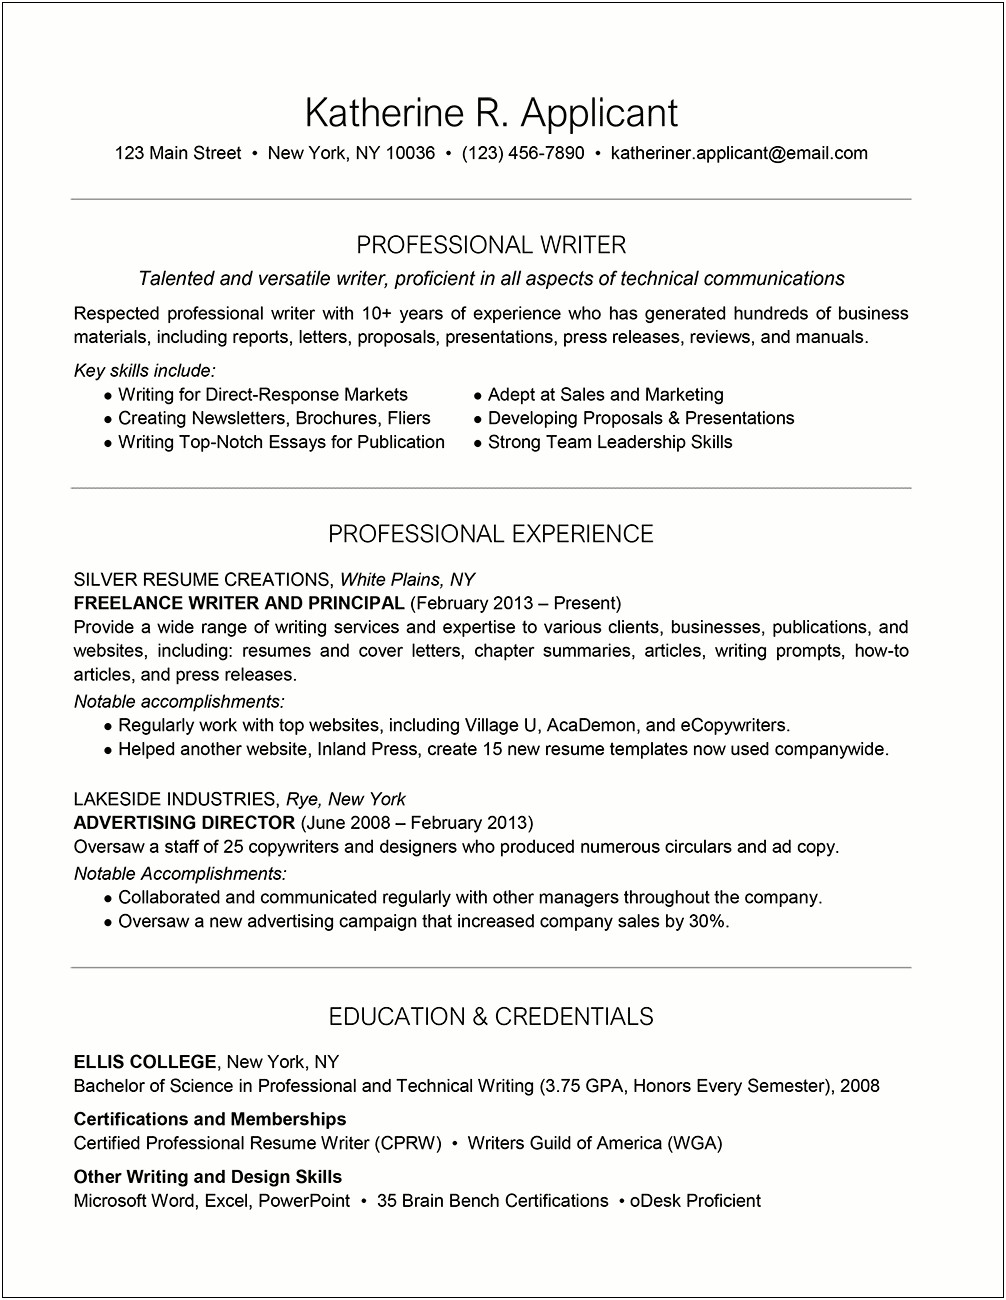 Words Besides Proficient To Use On Resume